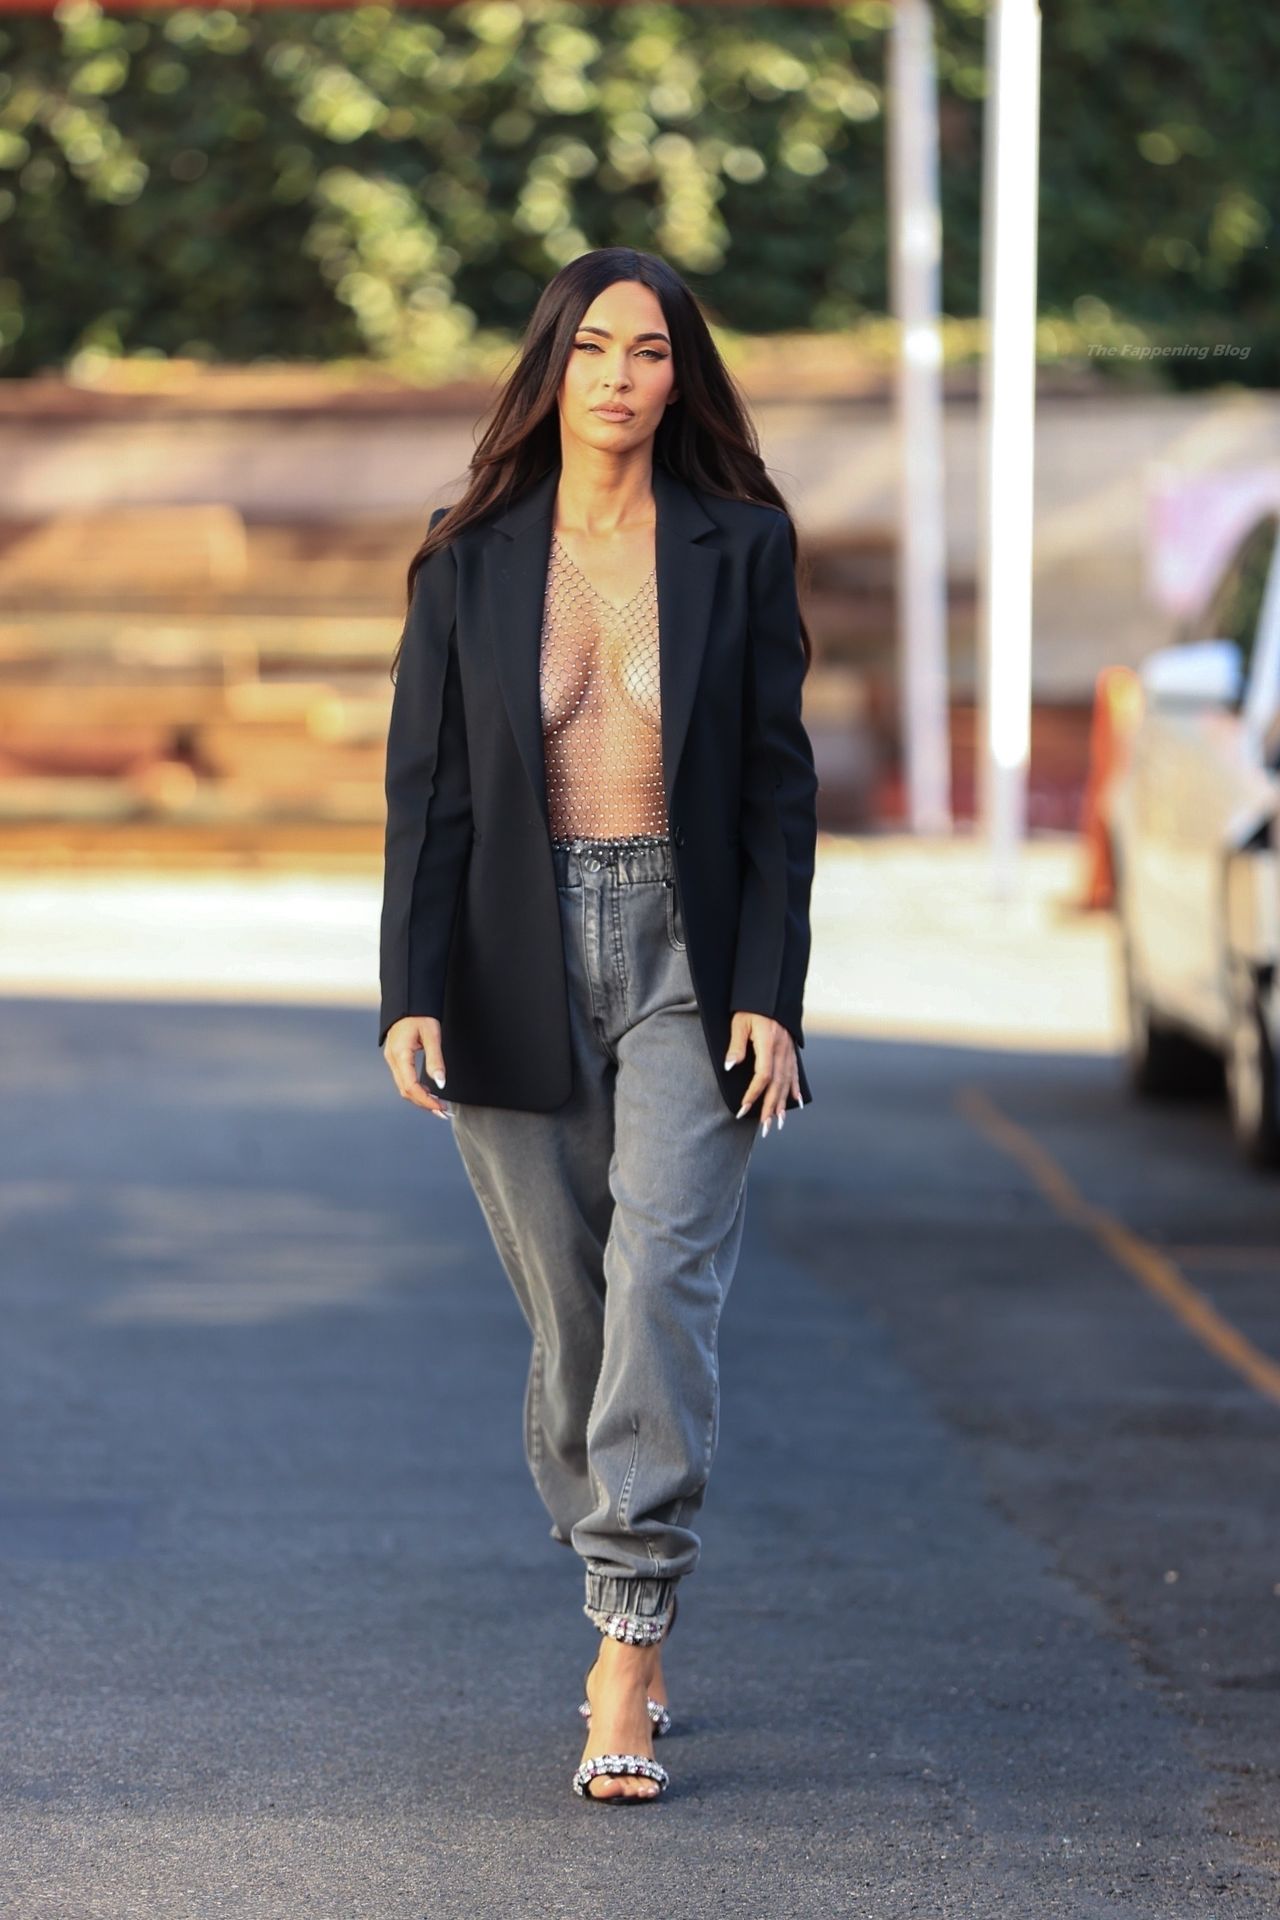 Megan Fox Leaves Little to Imagination While Leaving a Photoshoot in LA (27 Photos)